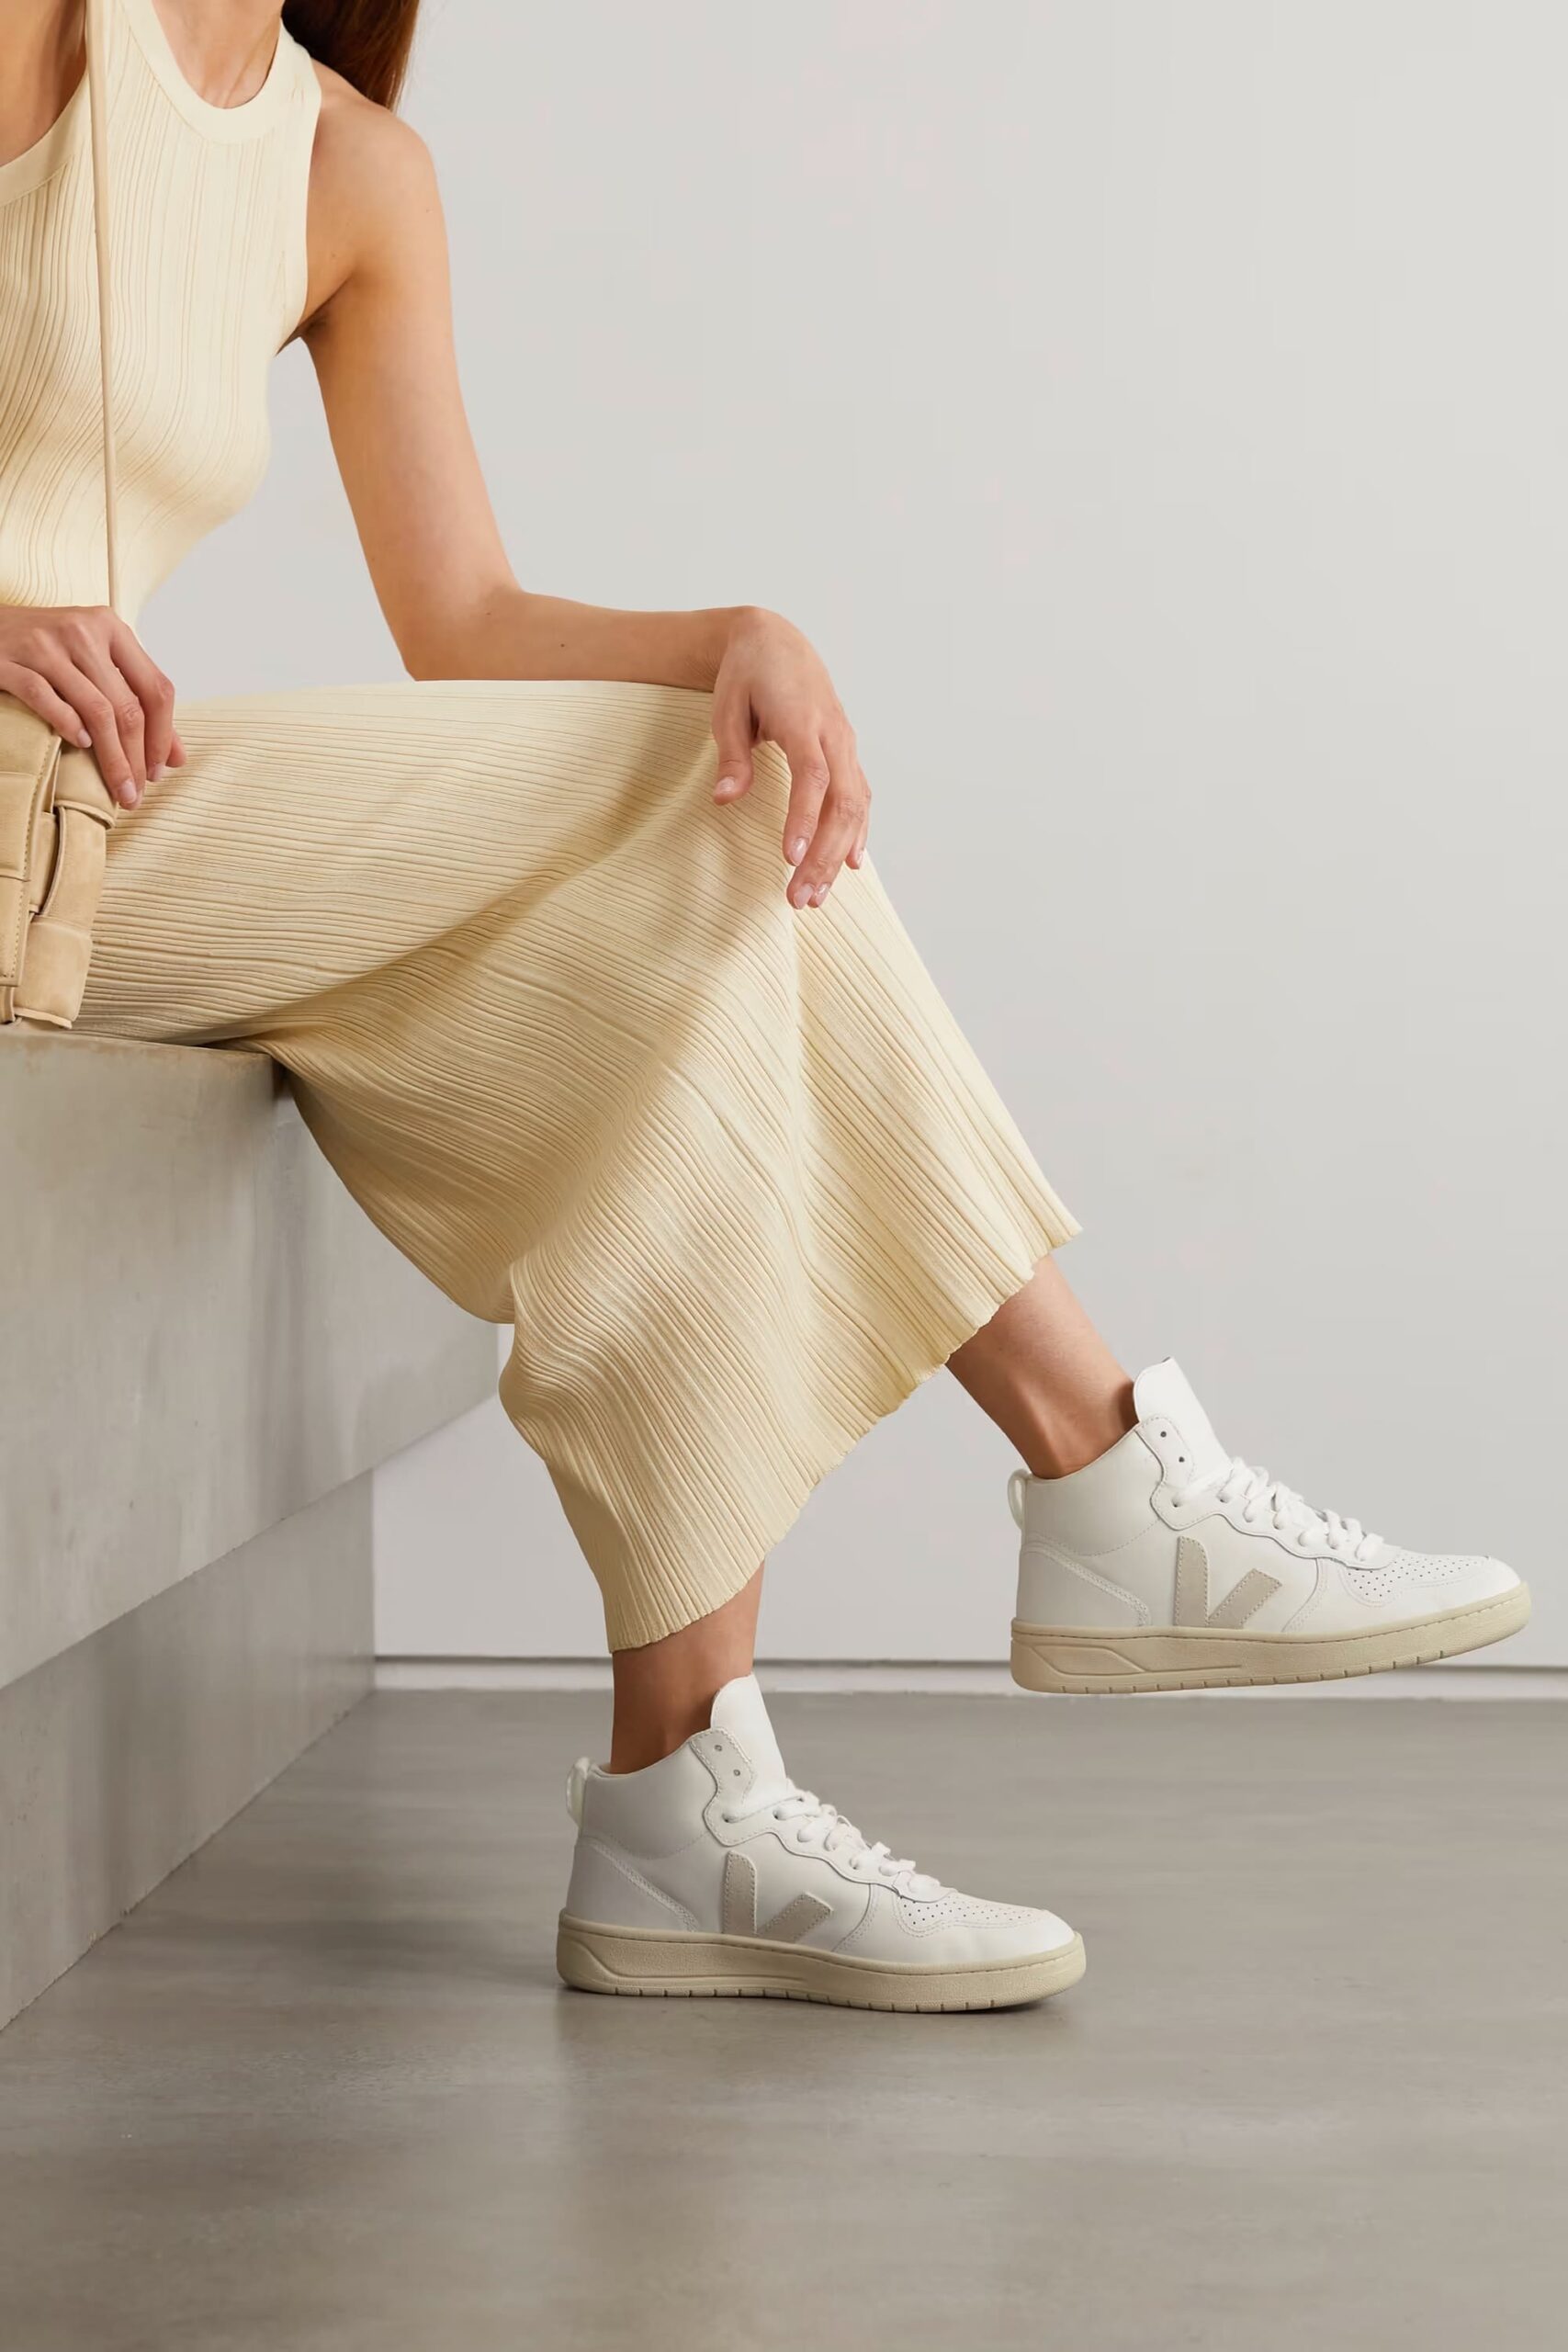 VEJA V-15 suede-trimmed perforated leather high-top sneakers - best white sneakers for women